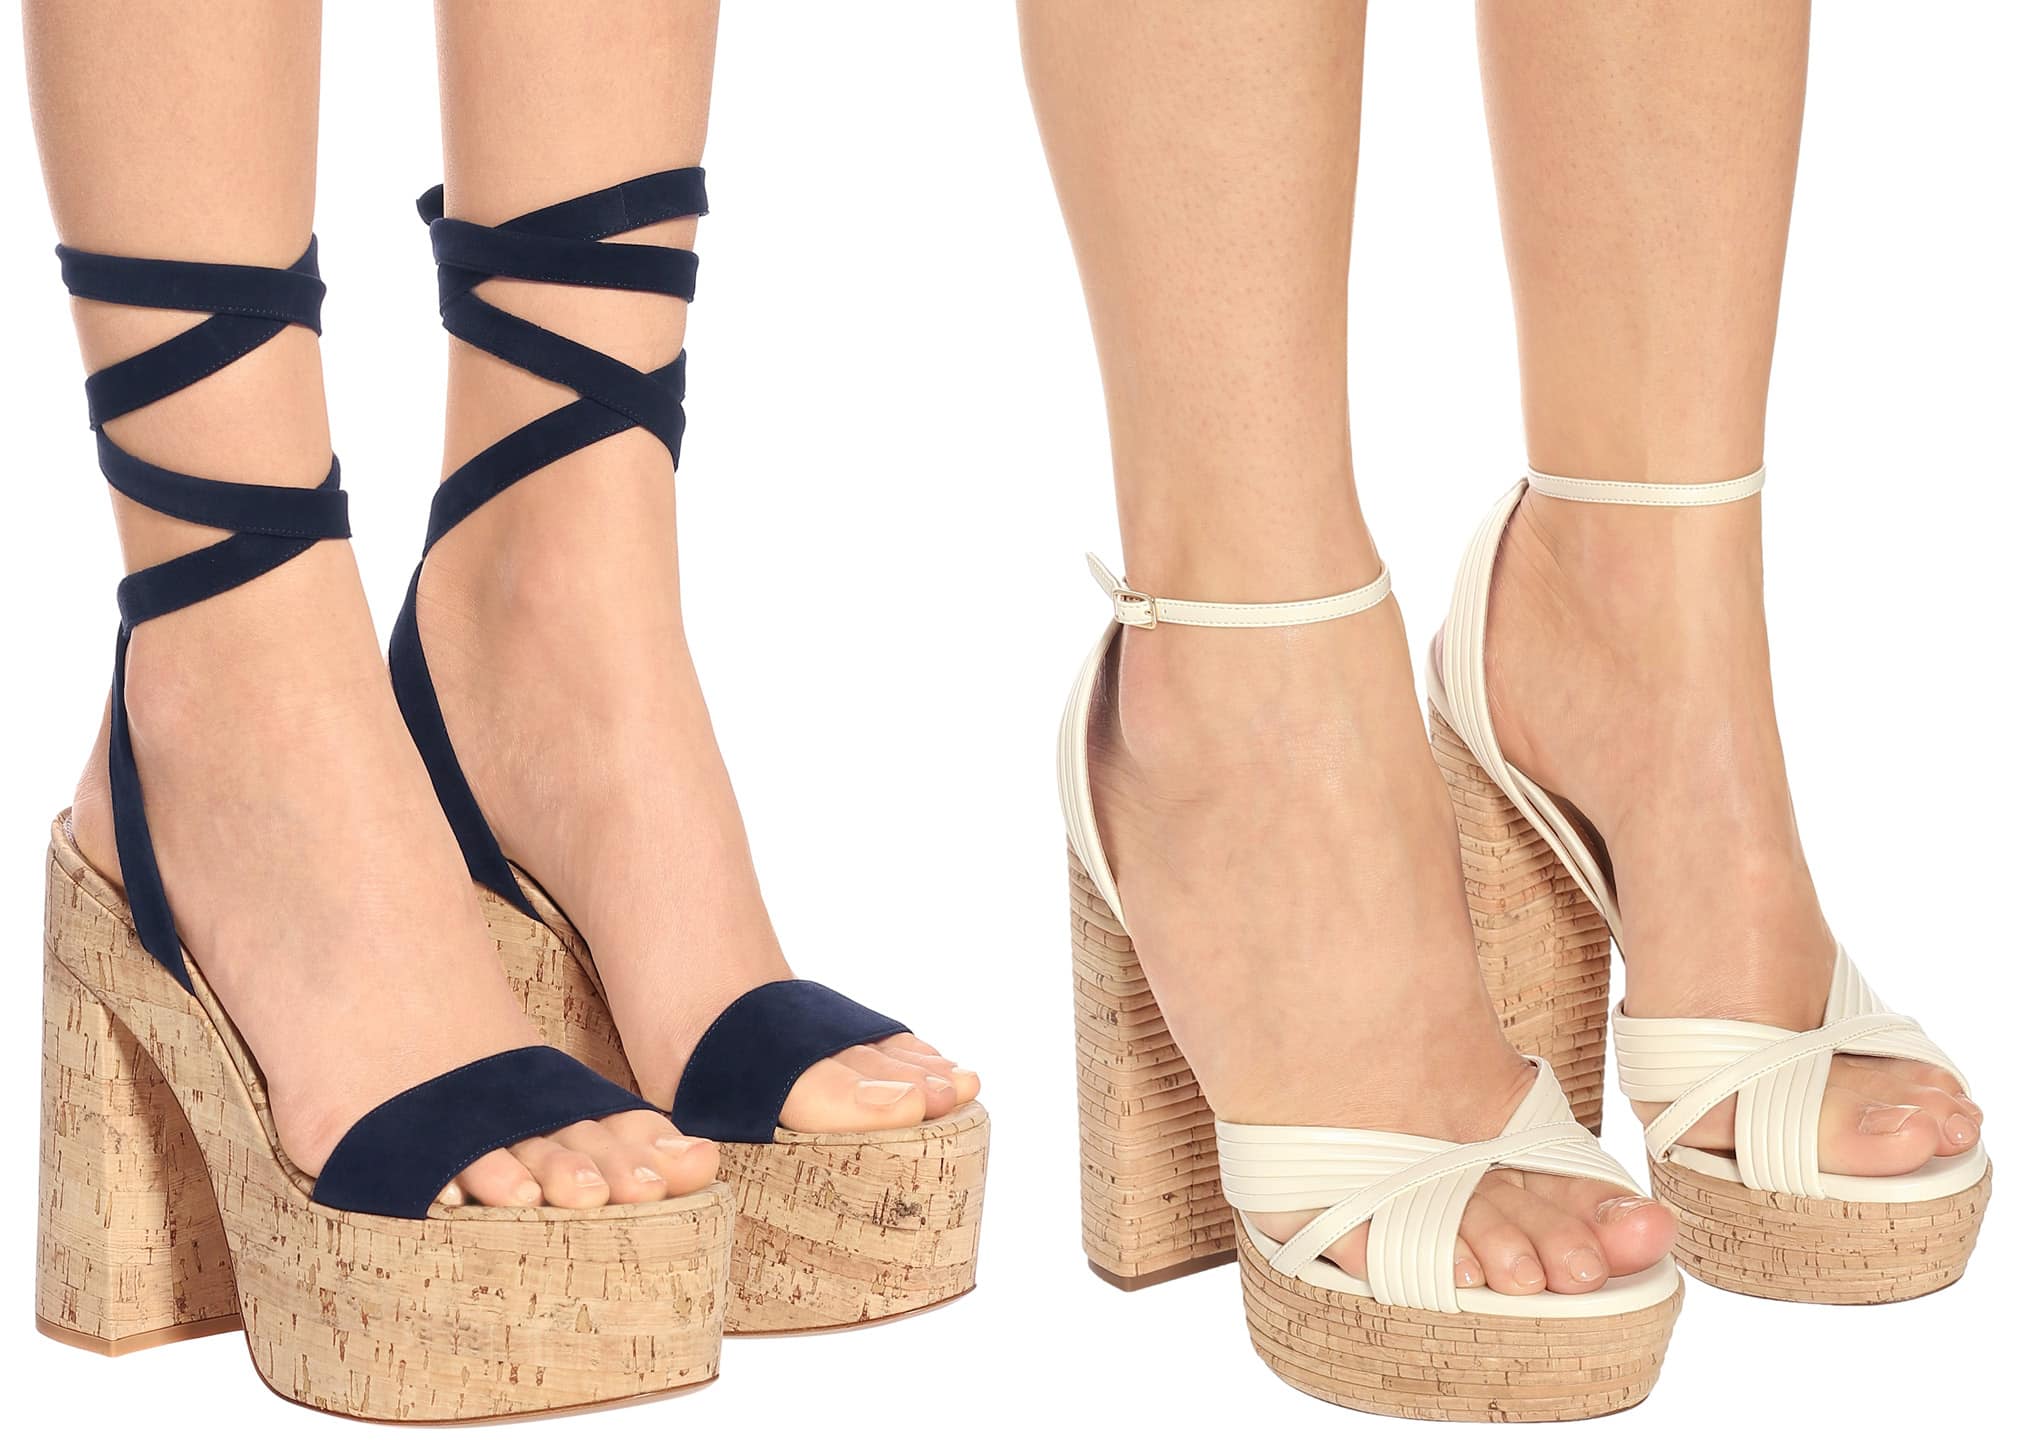 Cork platforms are lightweight and therefore easy to walk in